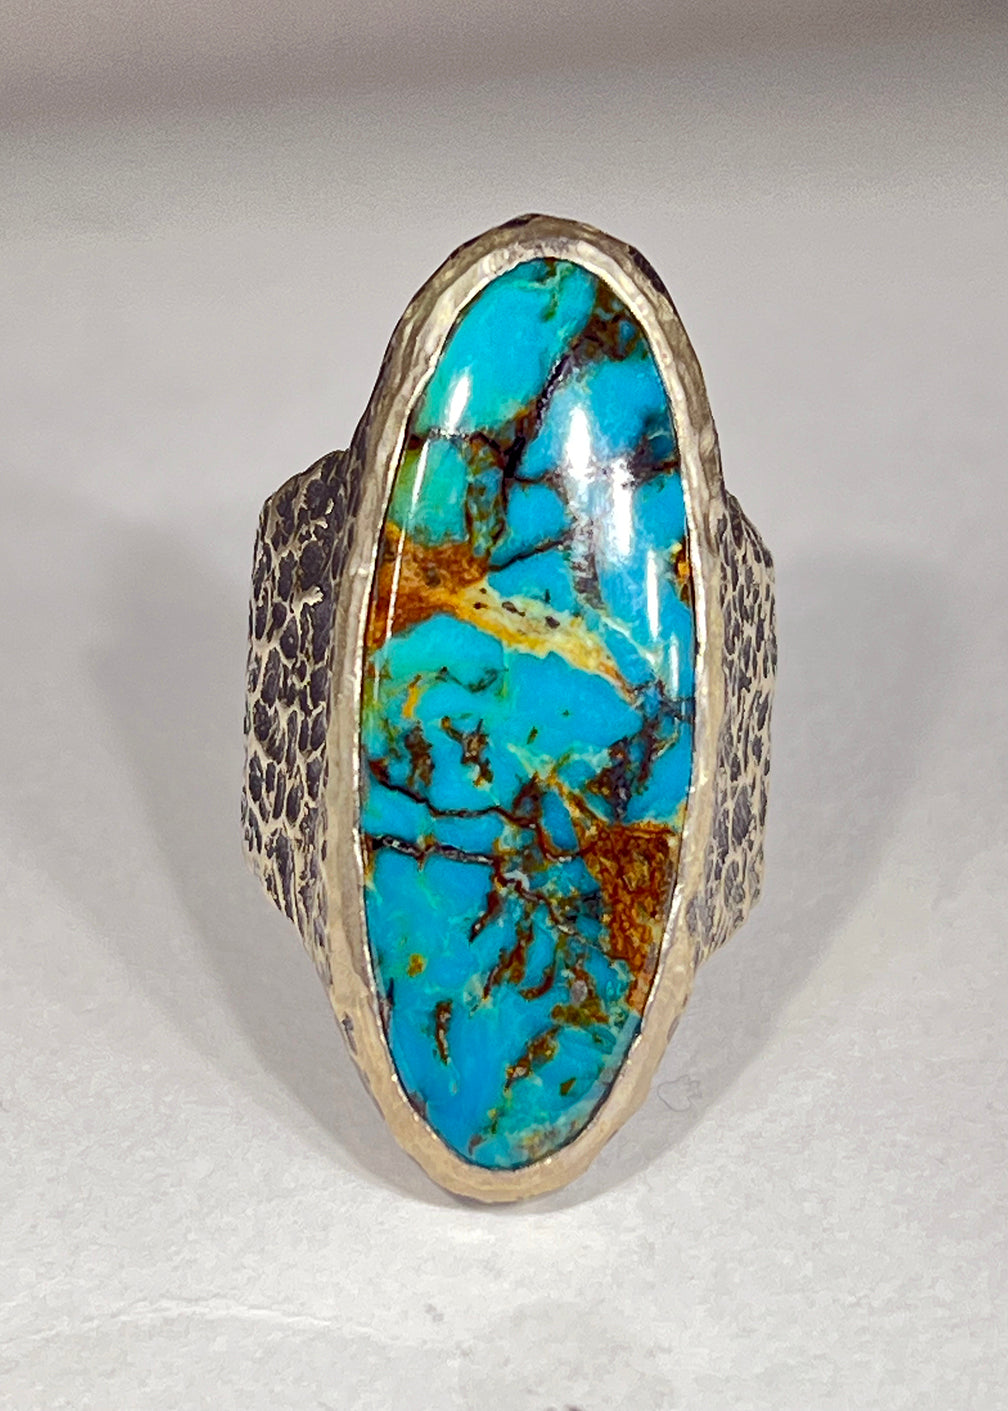 How to Choose Turquoise Gemstones